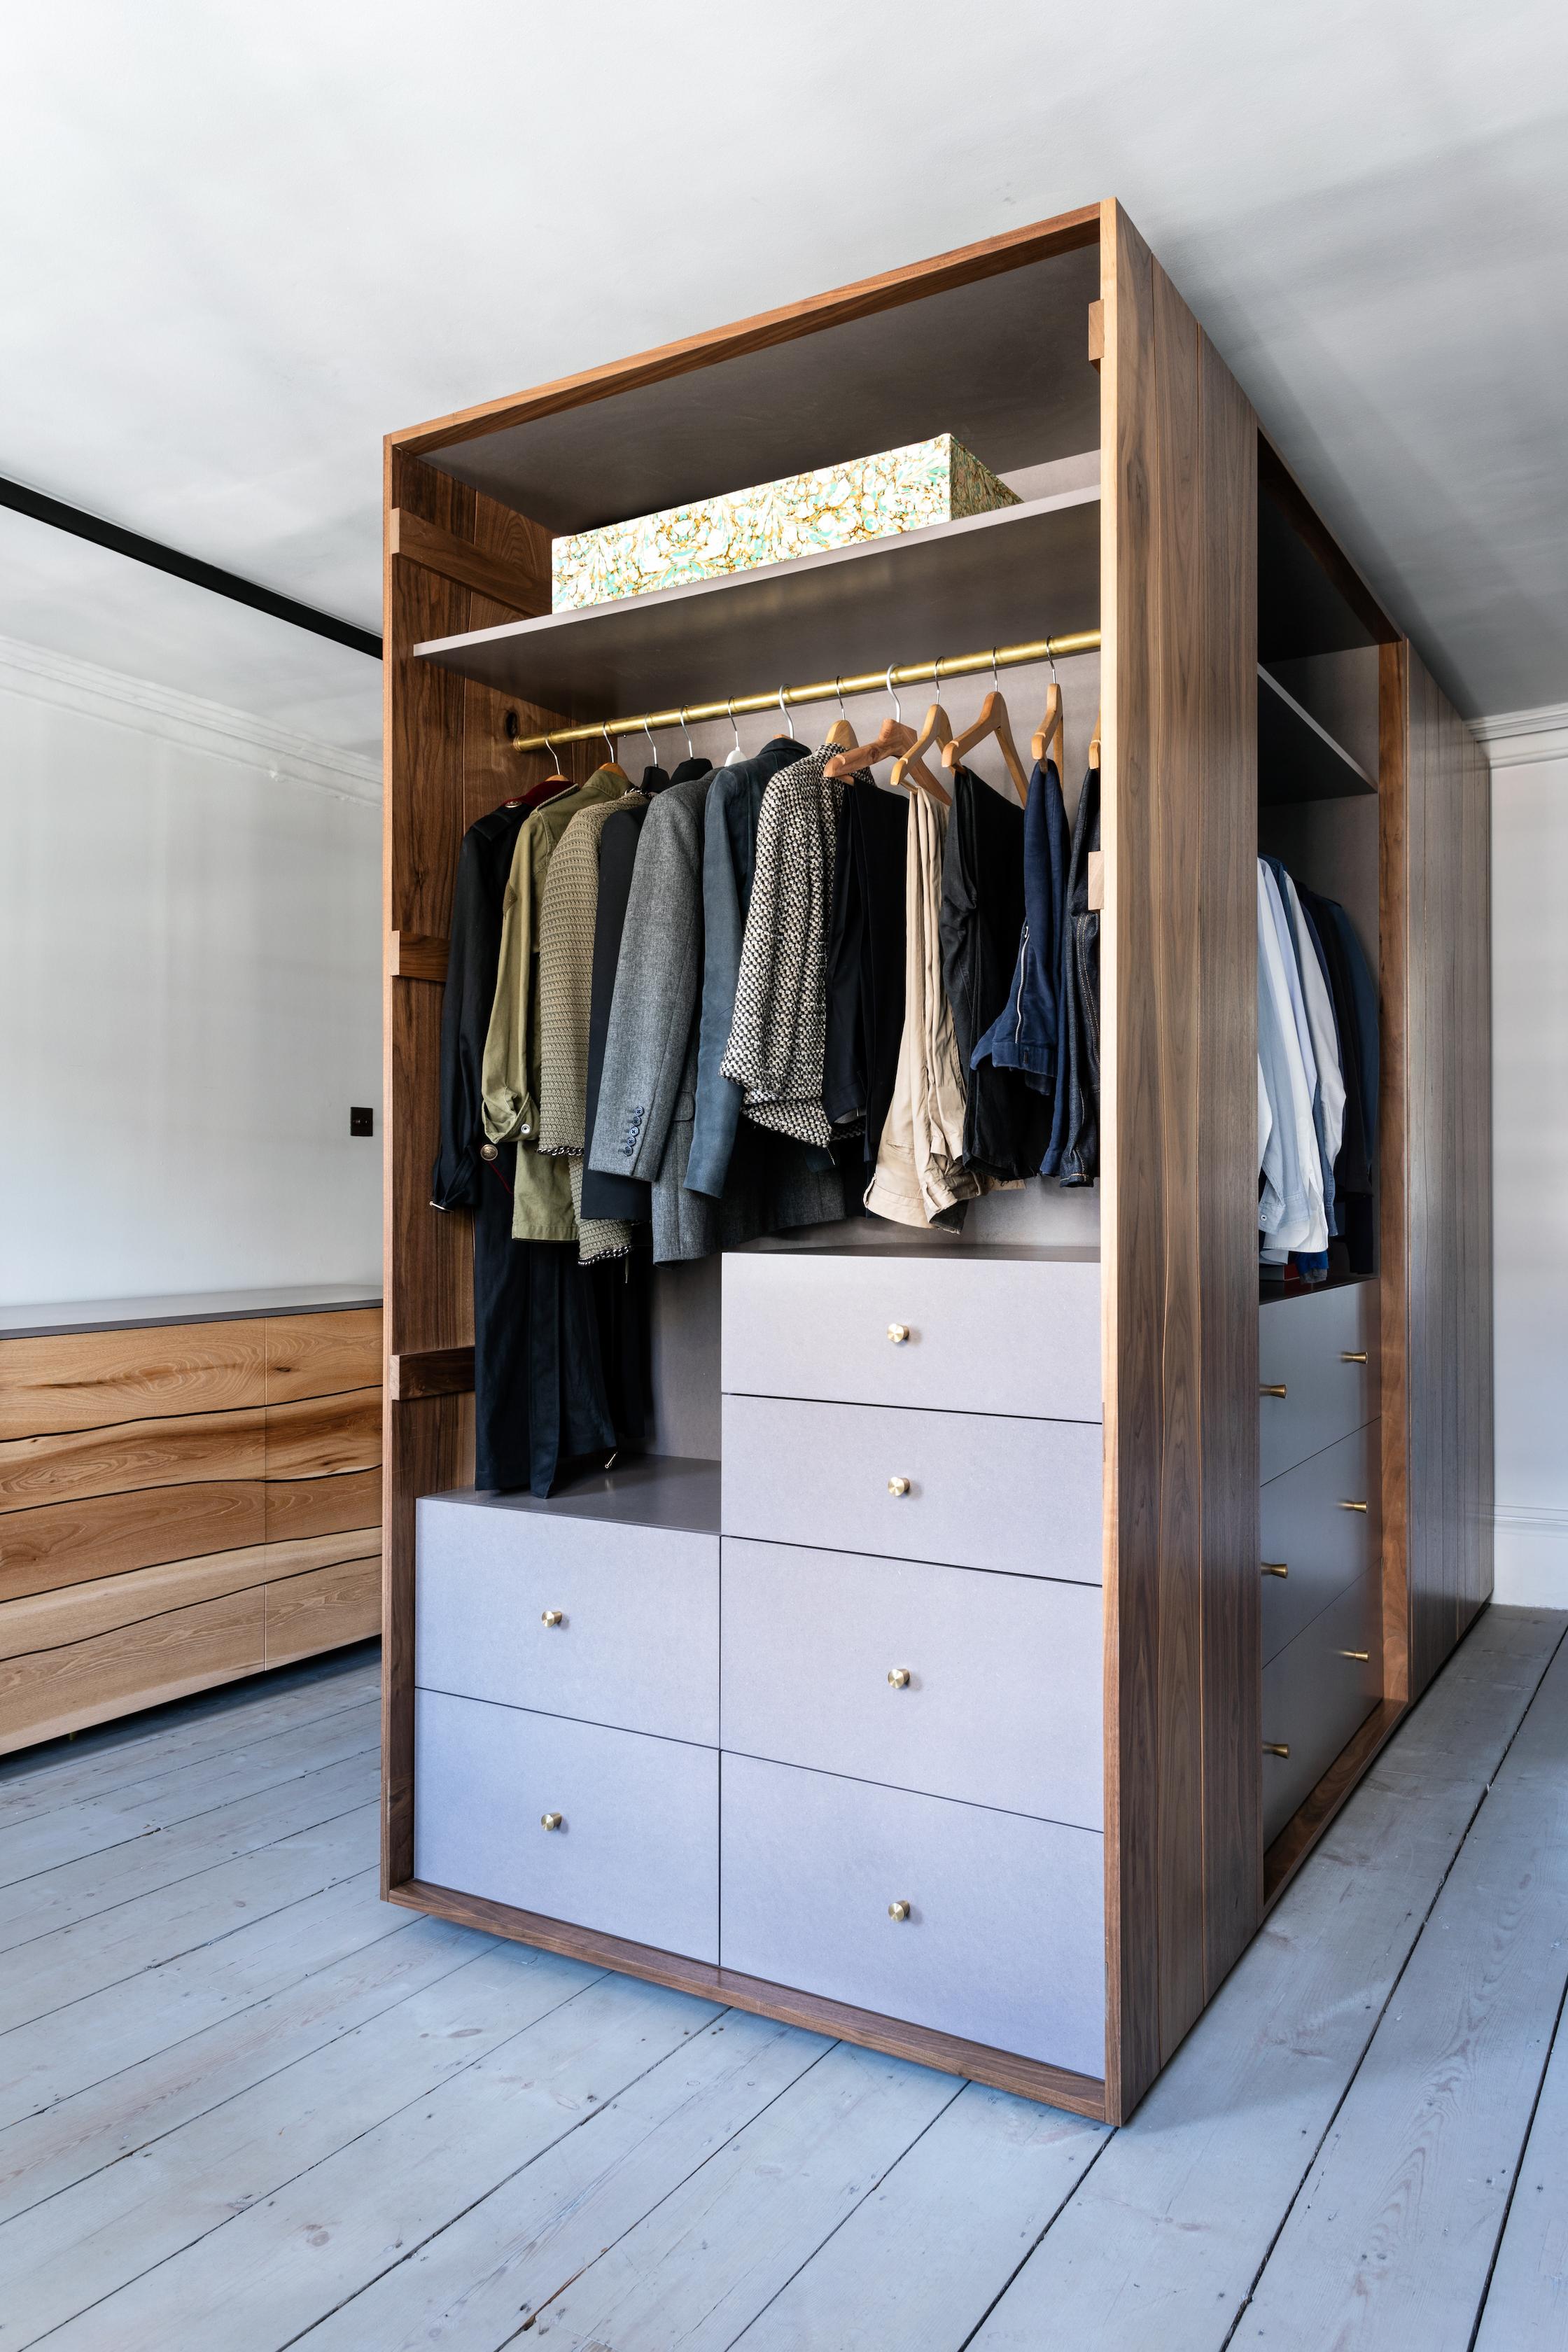 Ingrained wardrobe by Adam Blencowe
Materials: Walnut, Light Grey Valchromat, Brass Fittings
Dimensions: 210 x 240 x 120 cm

We use the Ingrained design across three pieces of furniture, wardrobes, dressers and sideboards.

Unusually for